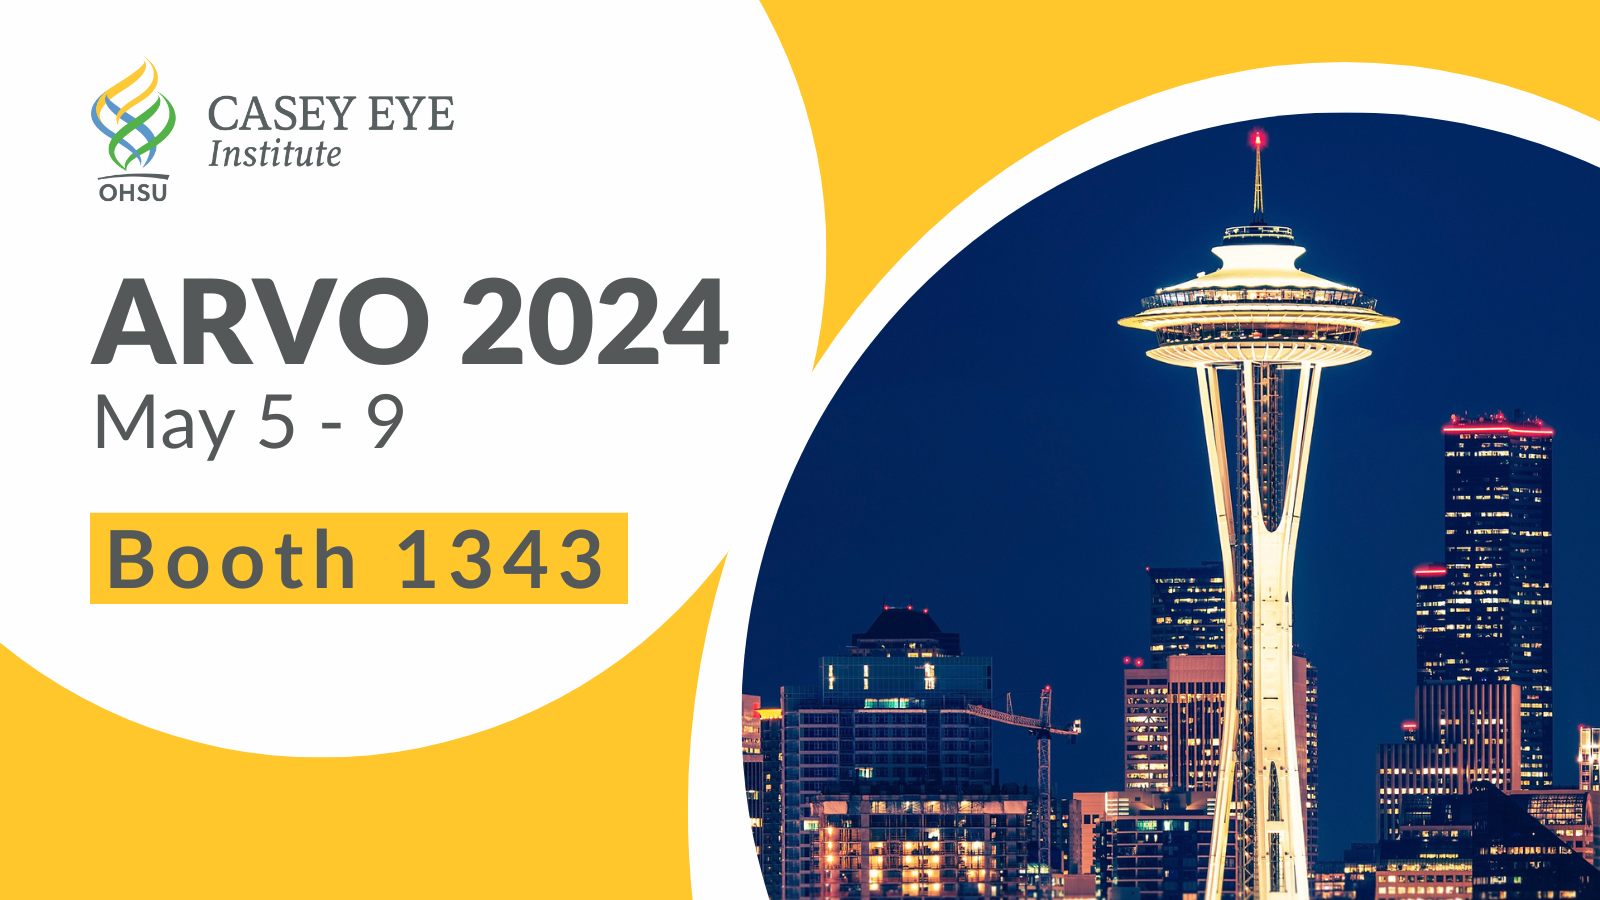 Picture of the Seattle Needle at night, with the OHSU Casey Eye Institute logo and text announcing the booth number 1343 and dates May 5-9.